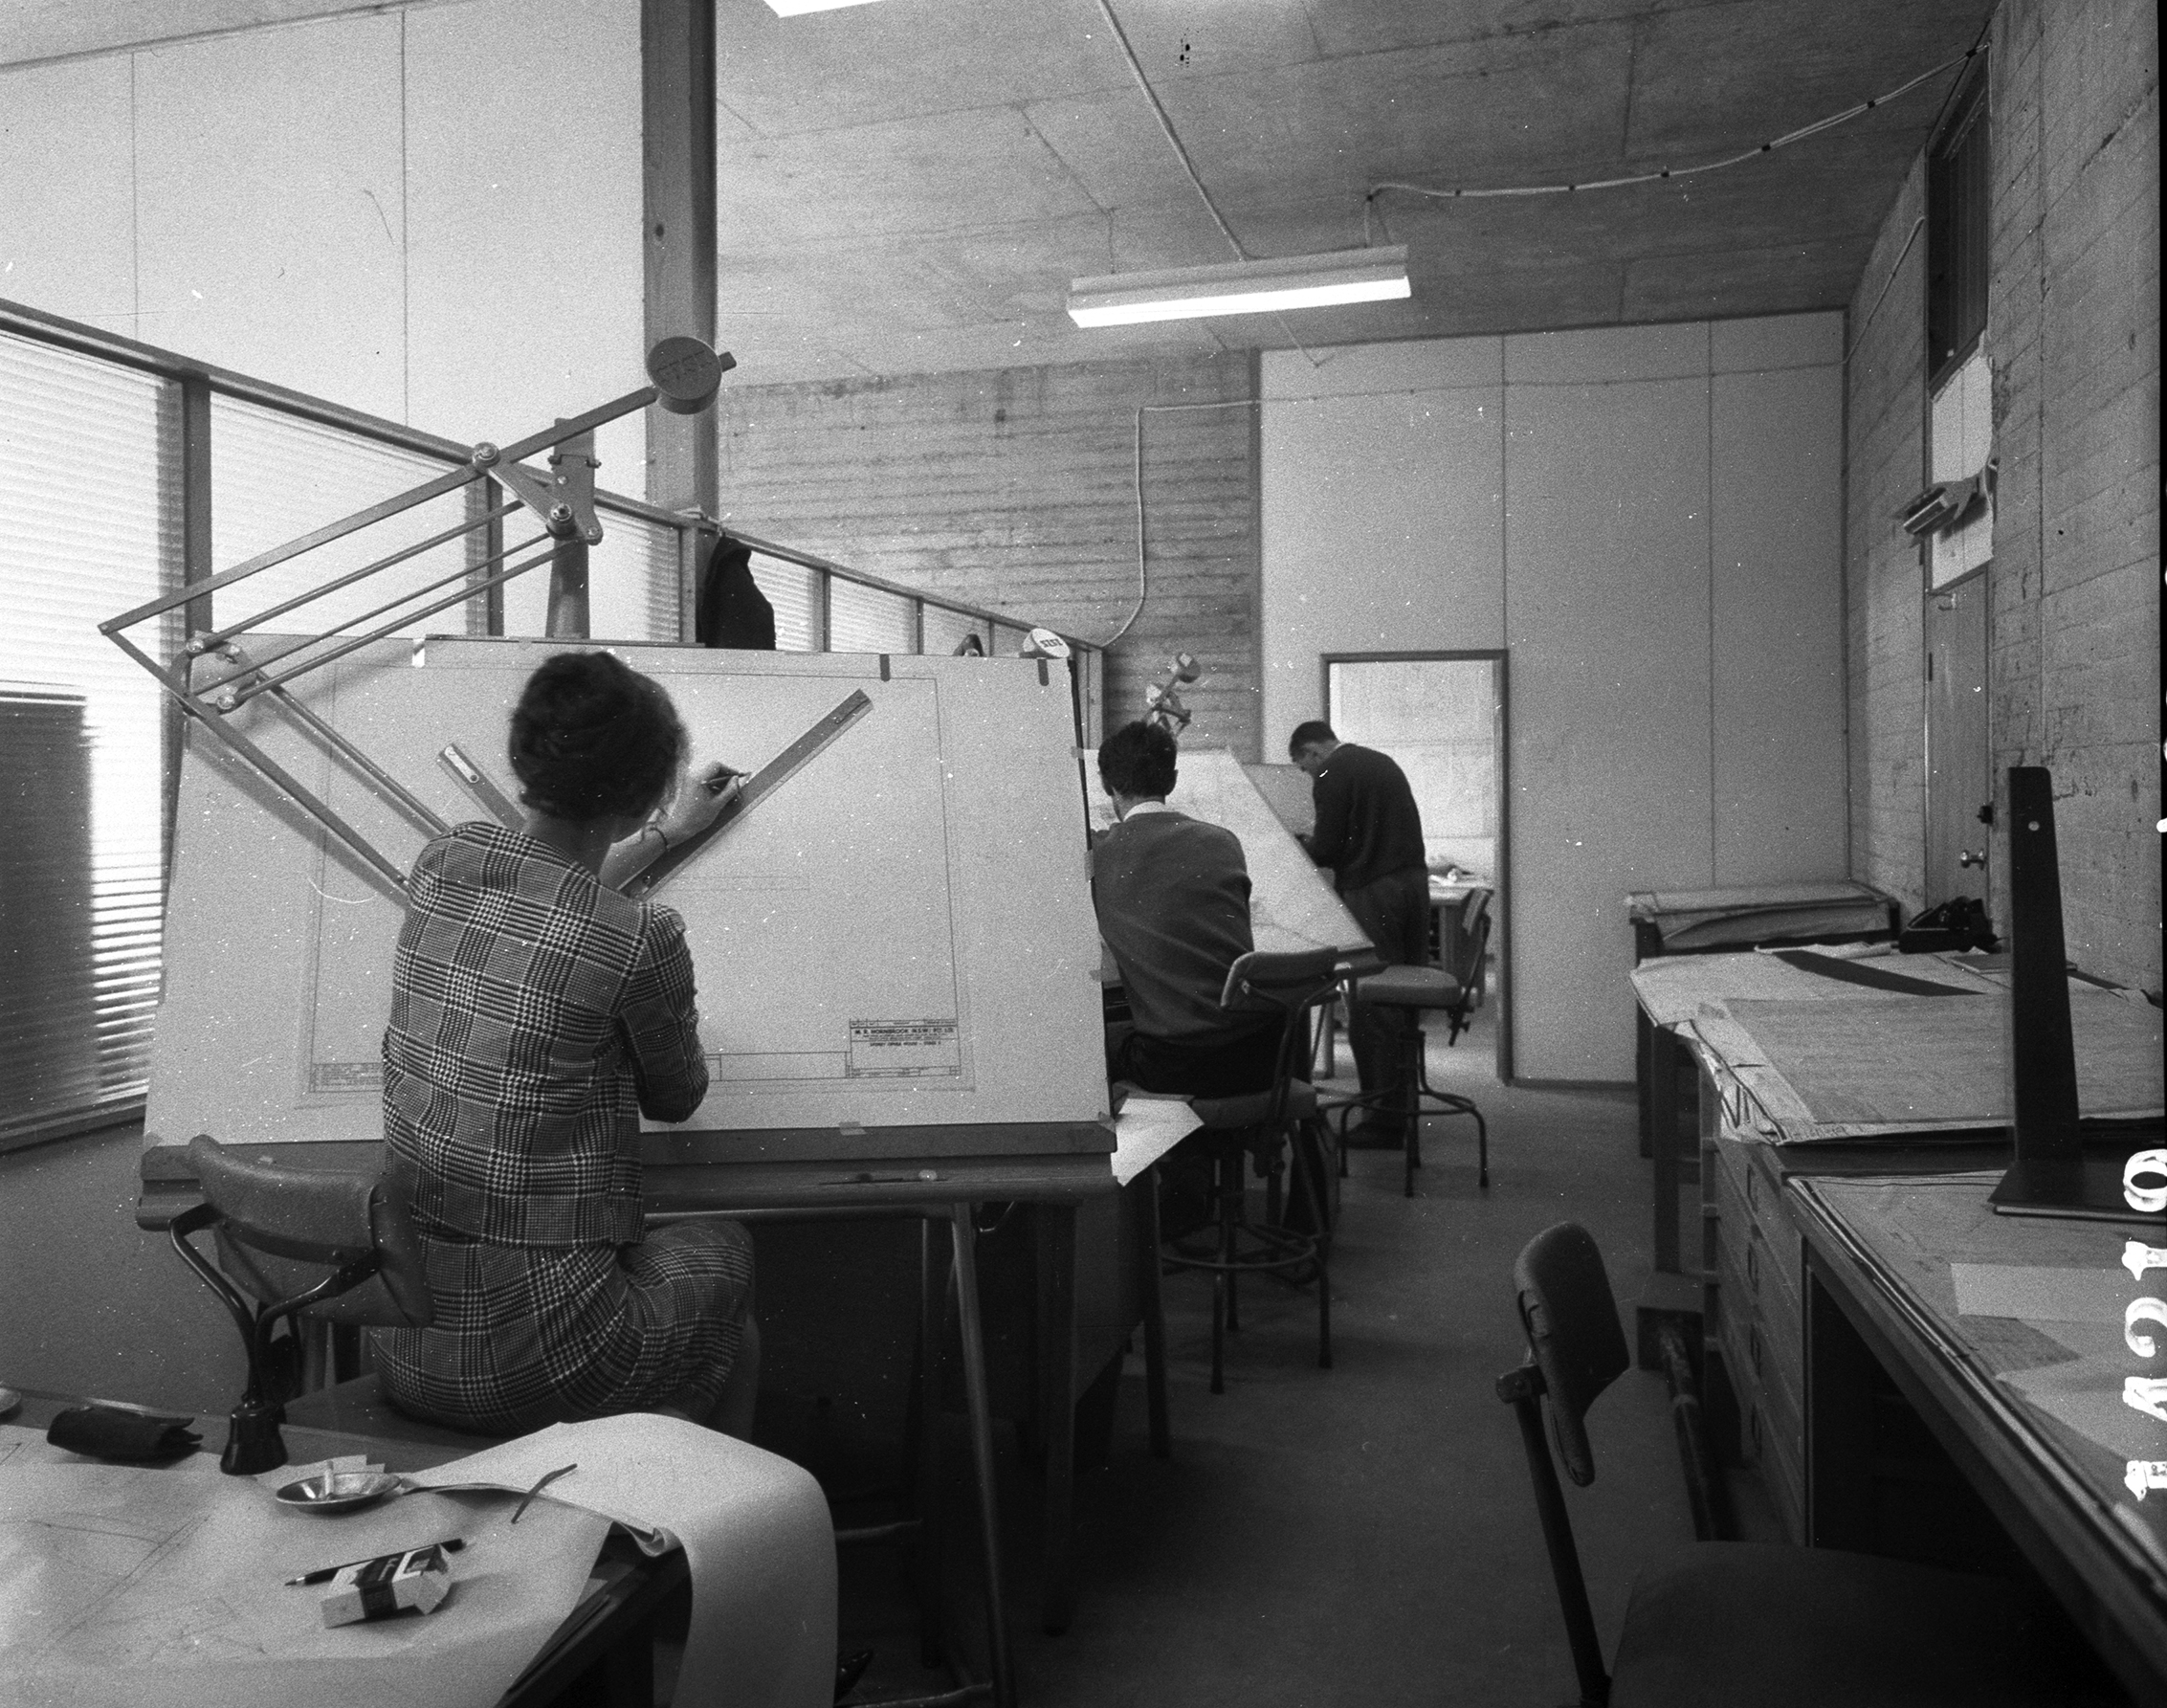 A black and white photograph of architects working at drafting tables in 1963